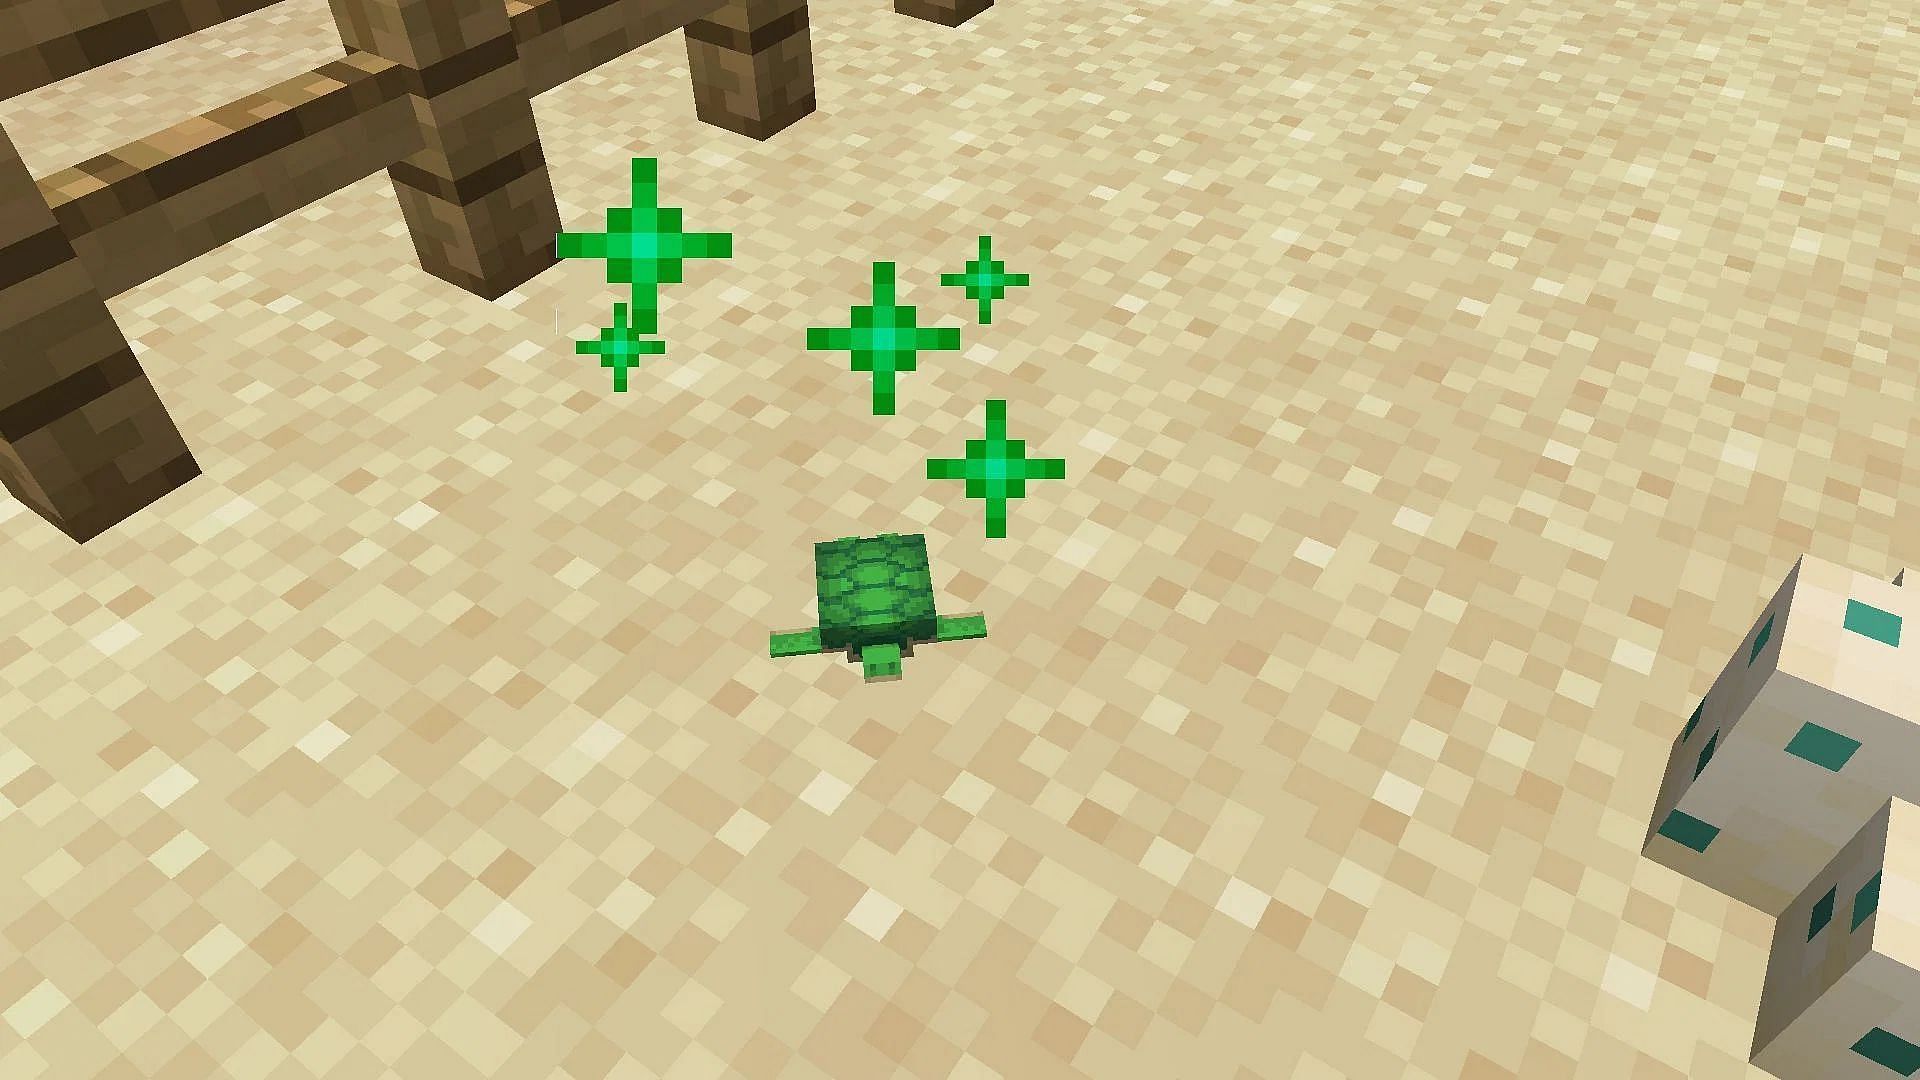 Baby turtles are the smallest entity in Minecraft 1.19 (Image via Mojang)